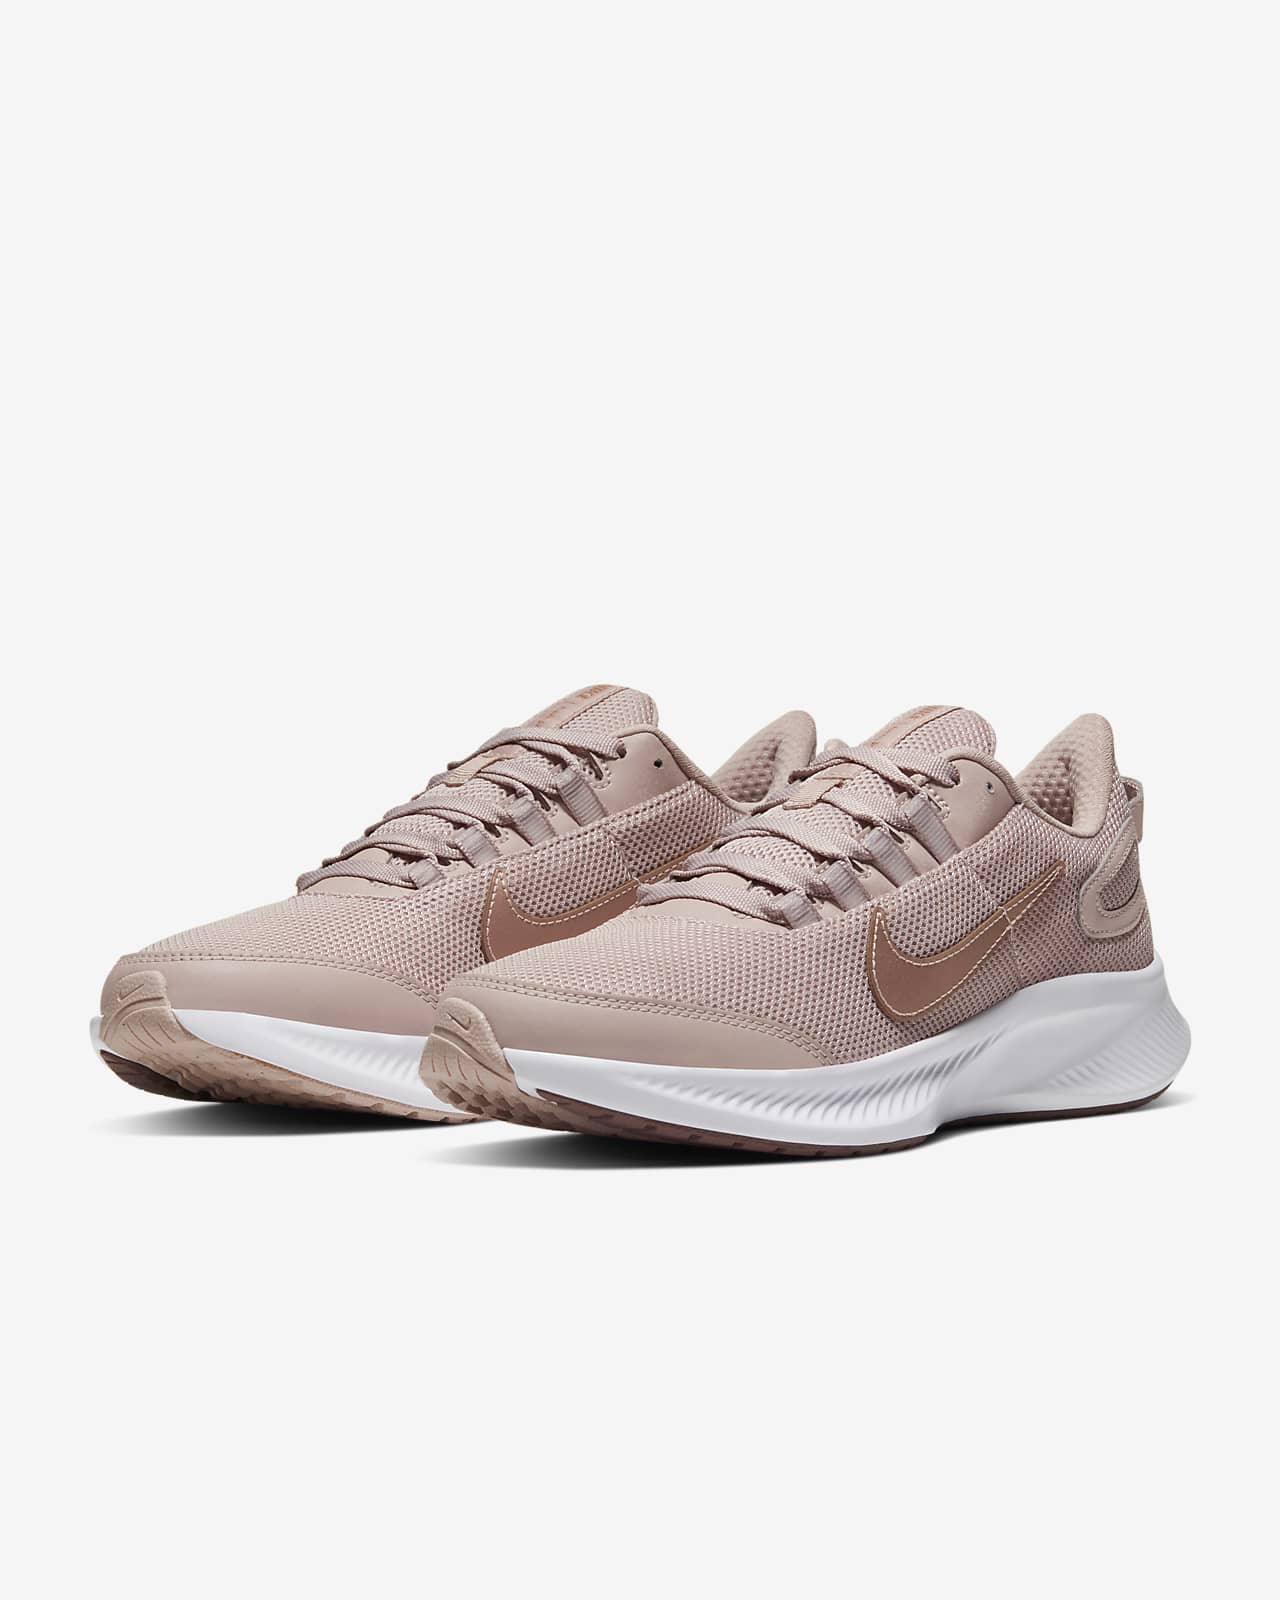 nike shoes nearby